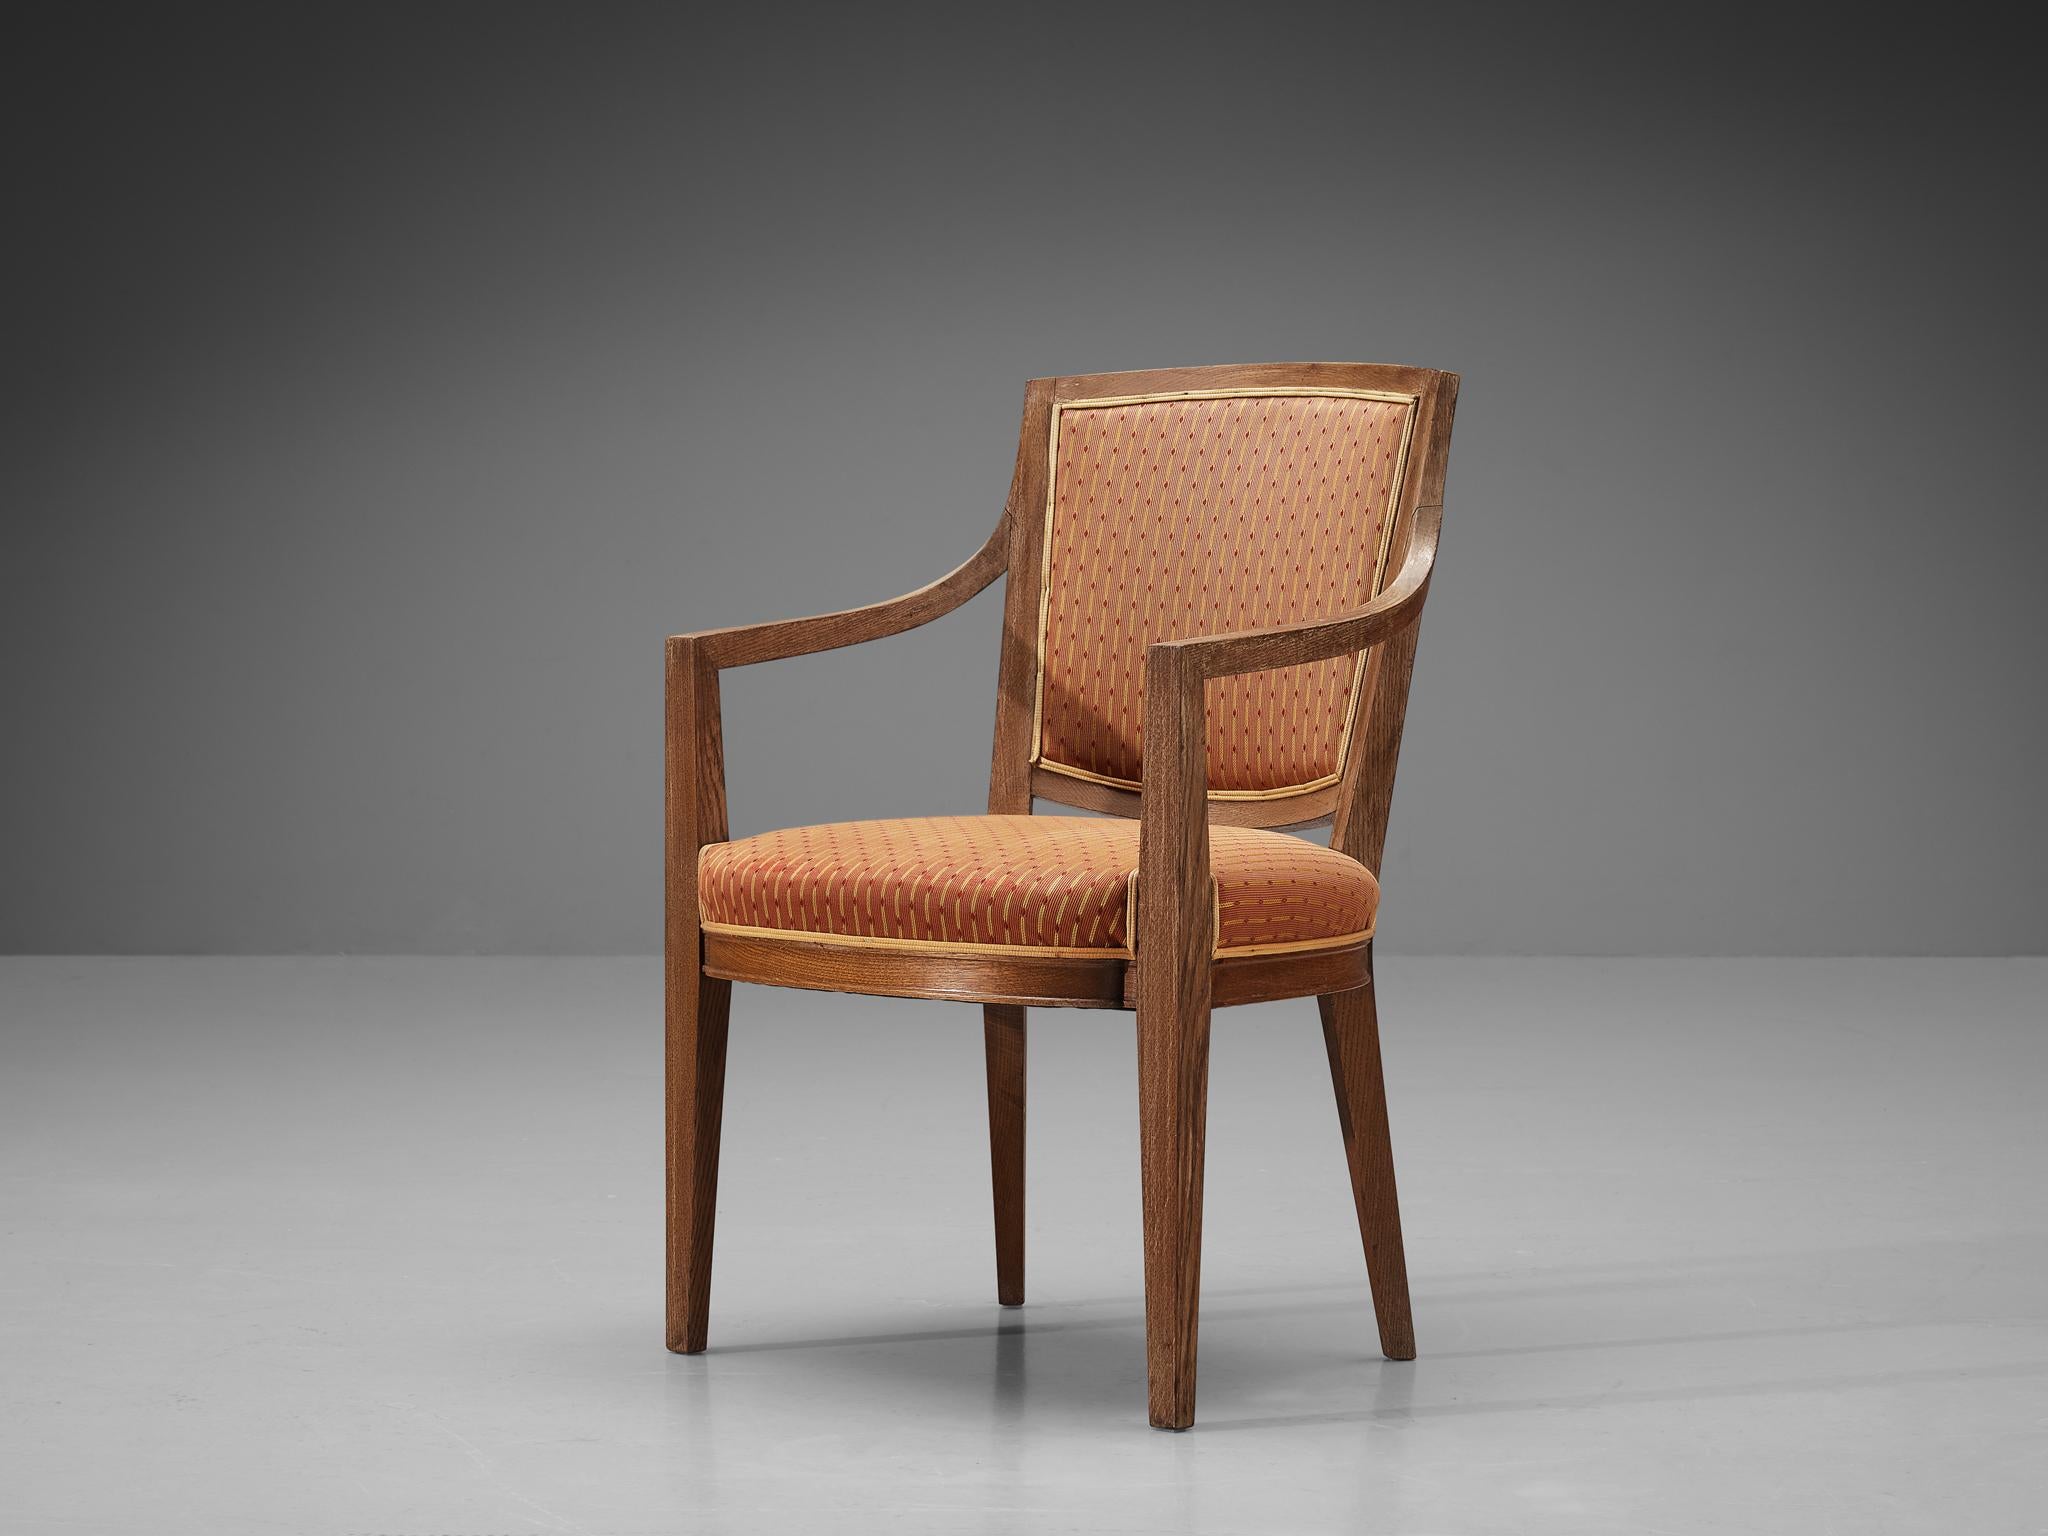 Dining chair, oak, fabric, France, 1940s

Late French Art Deco dining chair. This chair in solid oak features beautifully shaped sculptural legs and frame. Its armrests are rounded and contribute to its overall elegant design. The two vertical